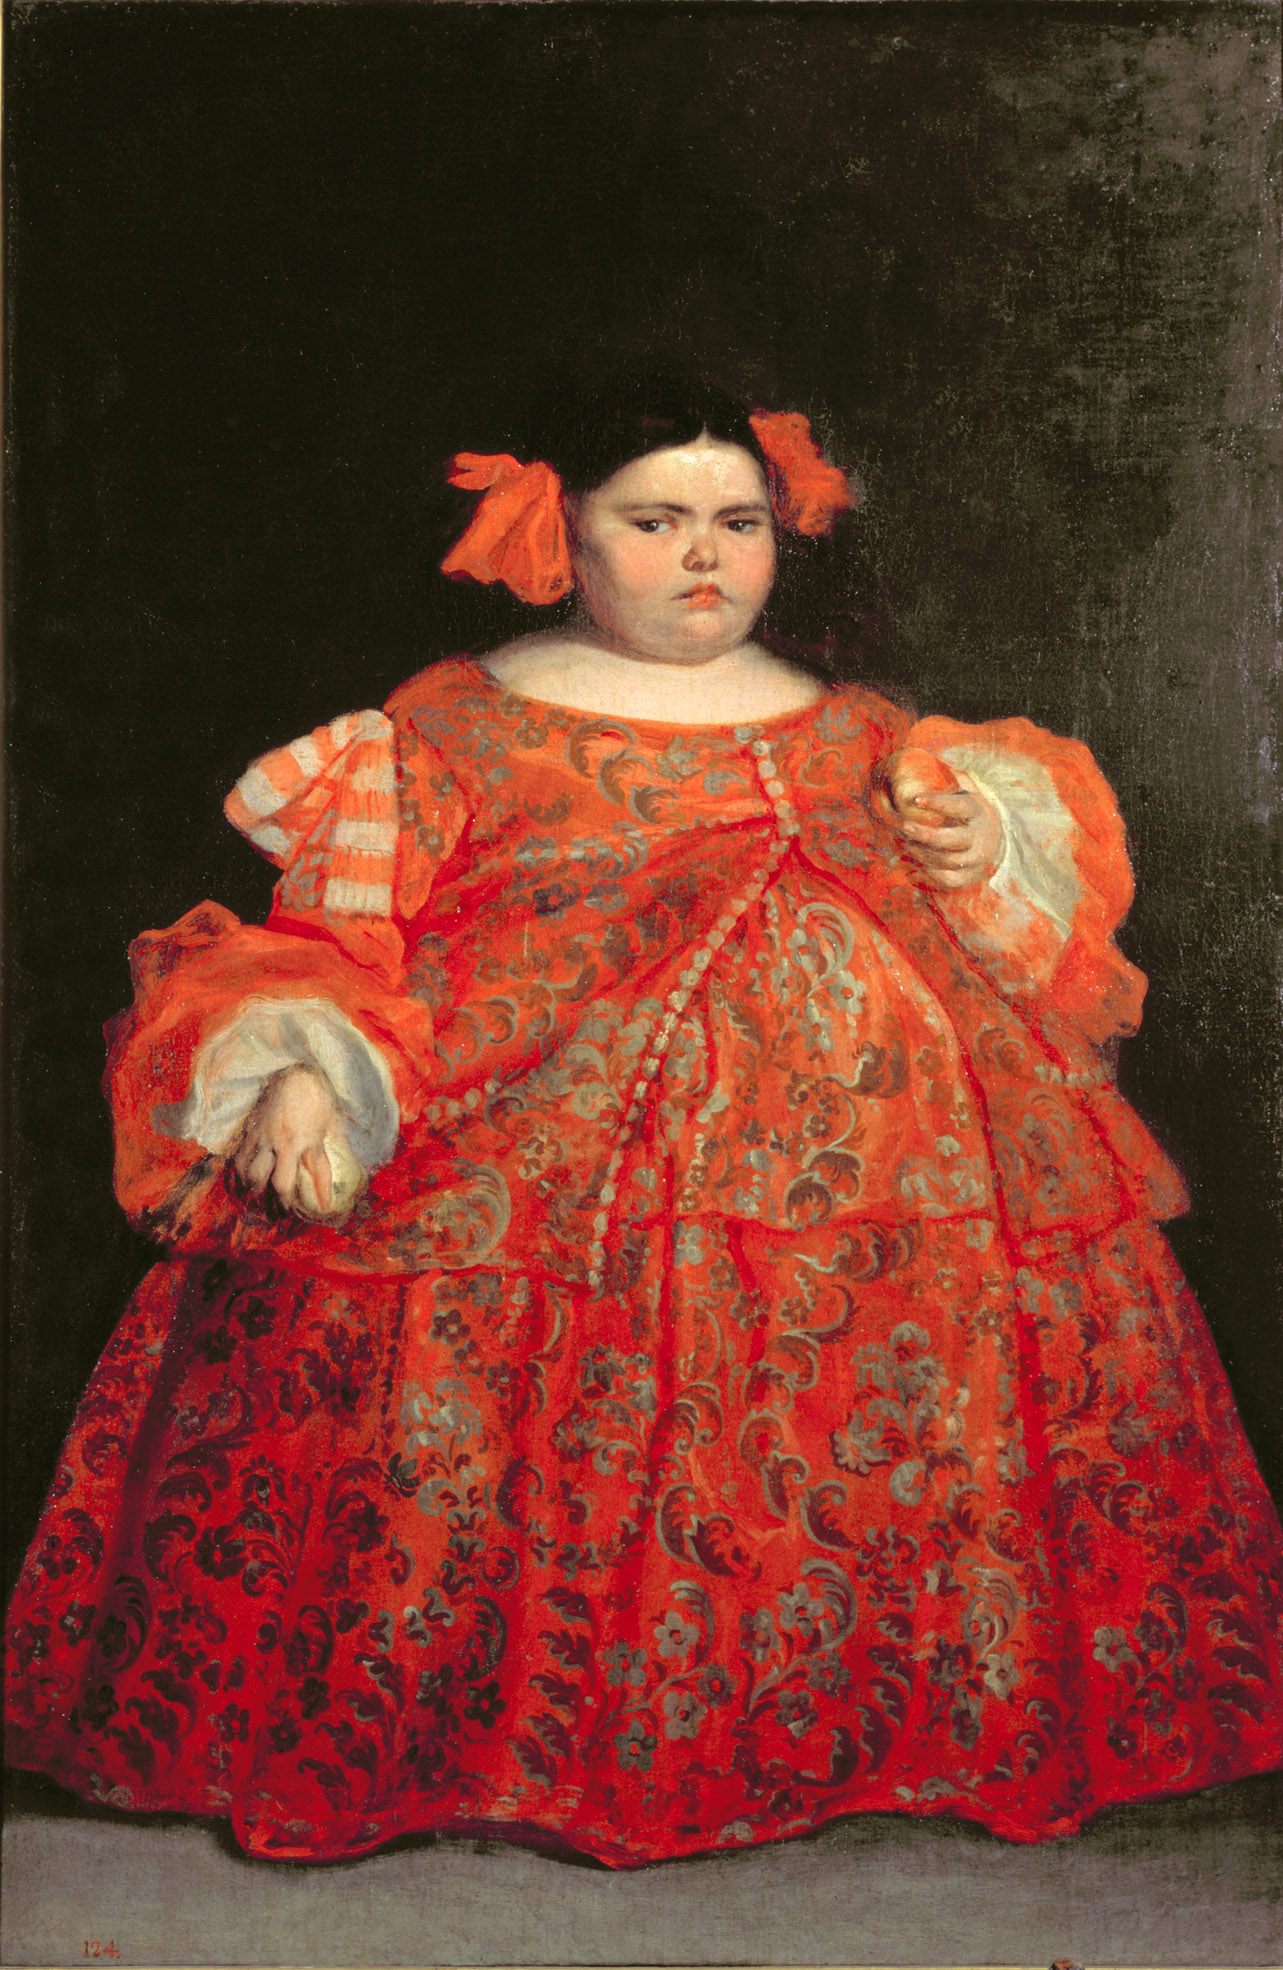 Seventeenth-century painting of an obese young girl wearing an elaborate red dress. 